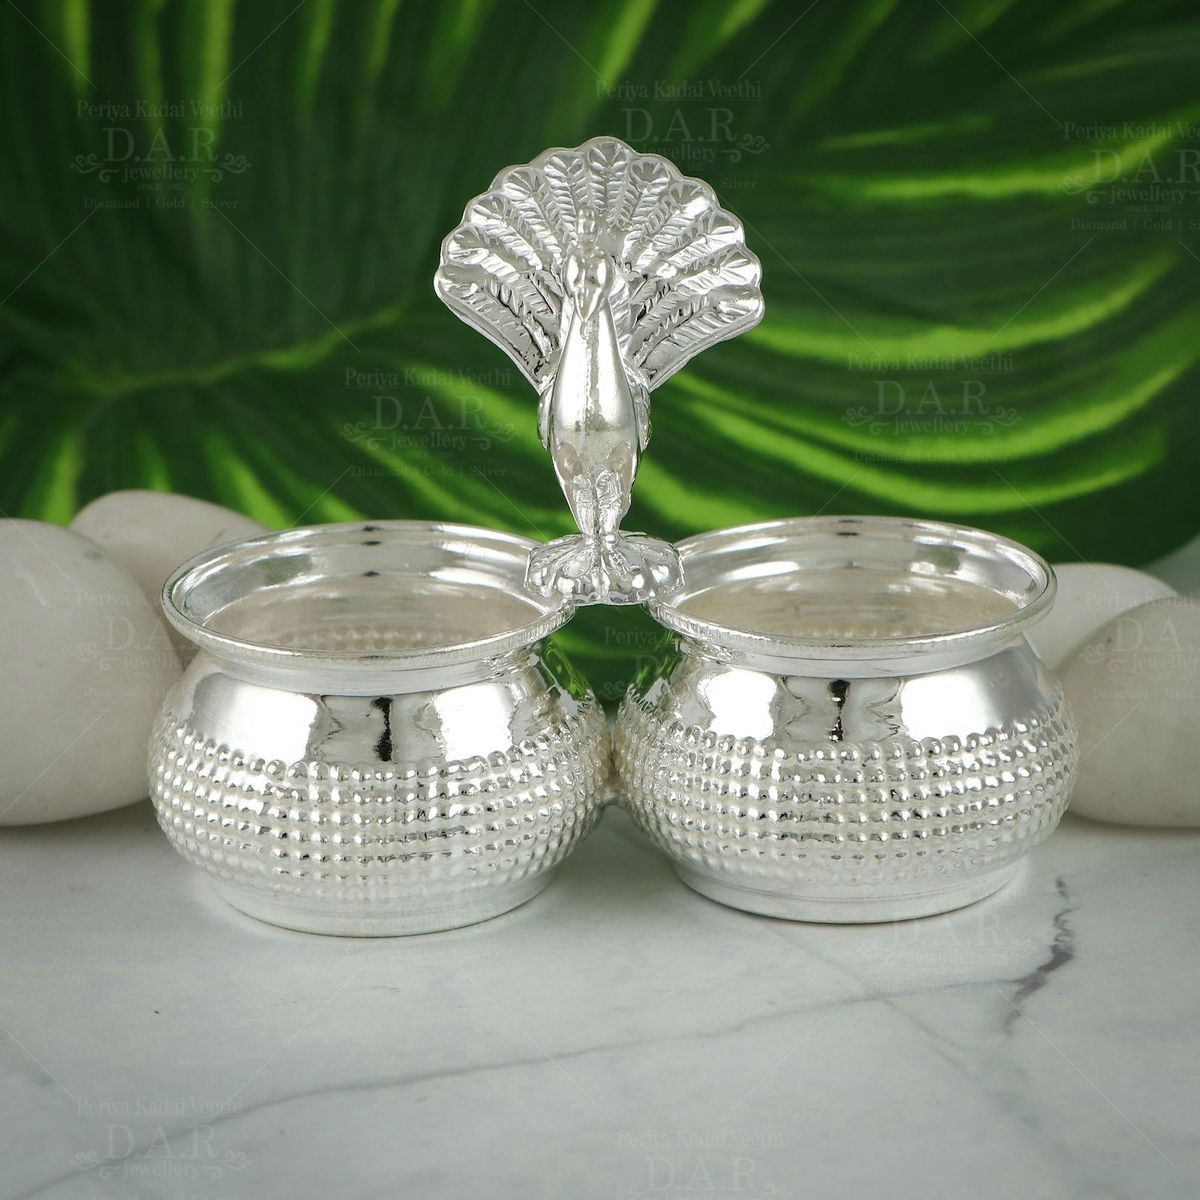 Download Kubera Lakshmi Pot Silver Diwali Gift Items - Statue PNG Image  with No Background - PNGkey.com